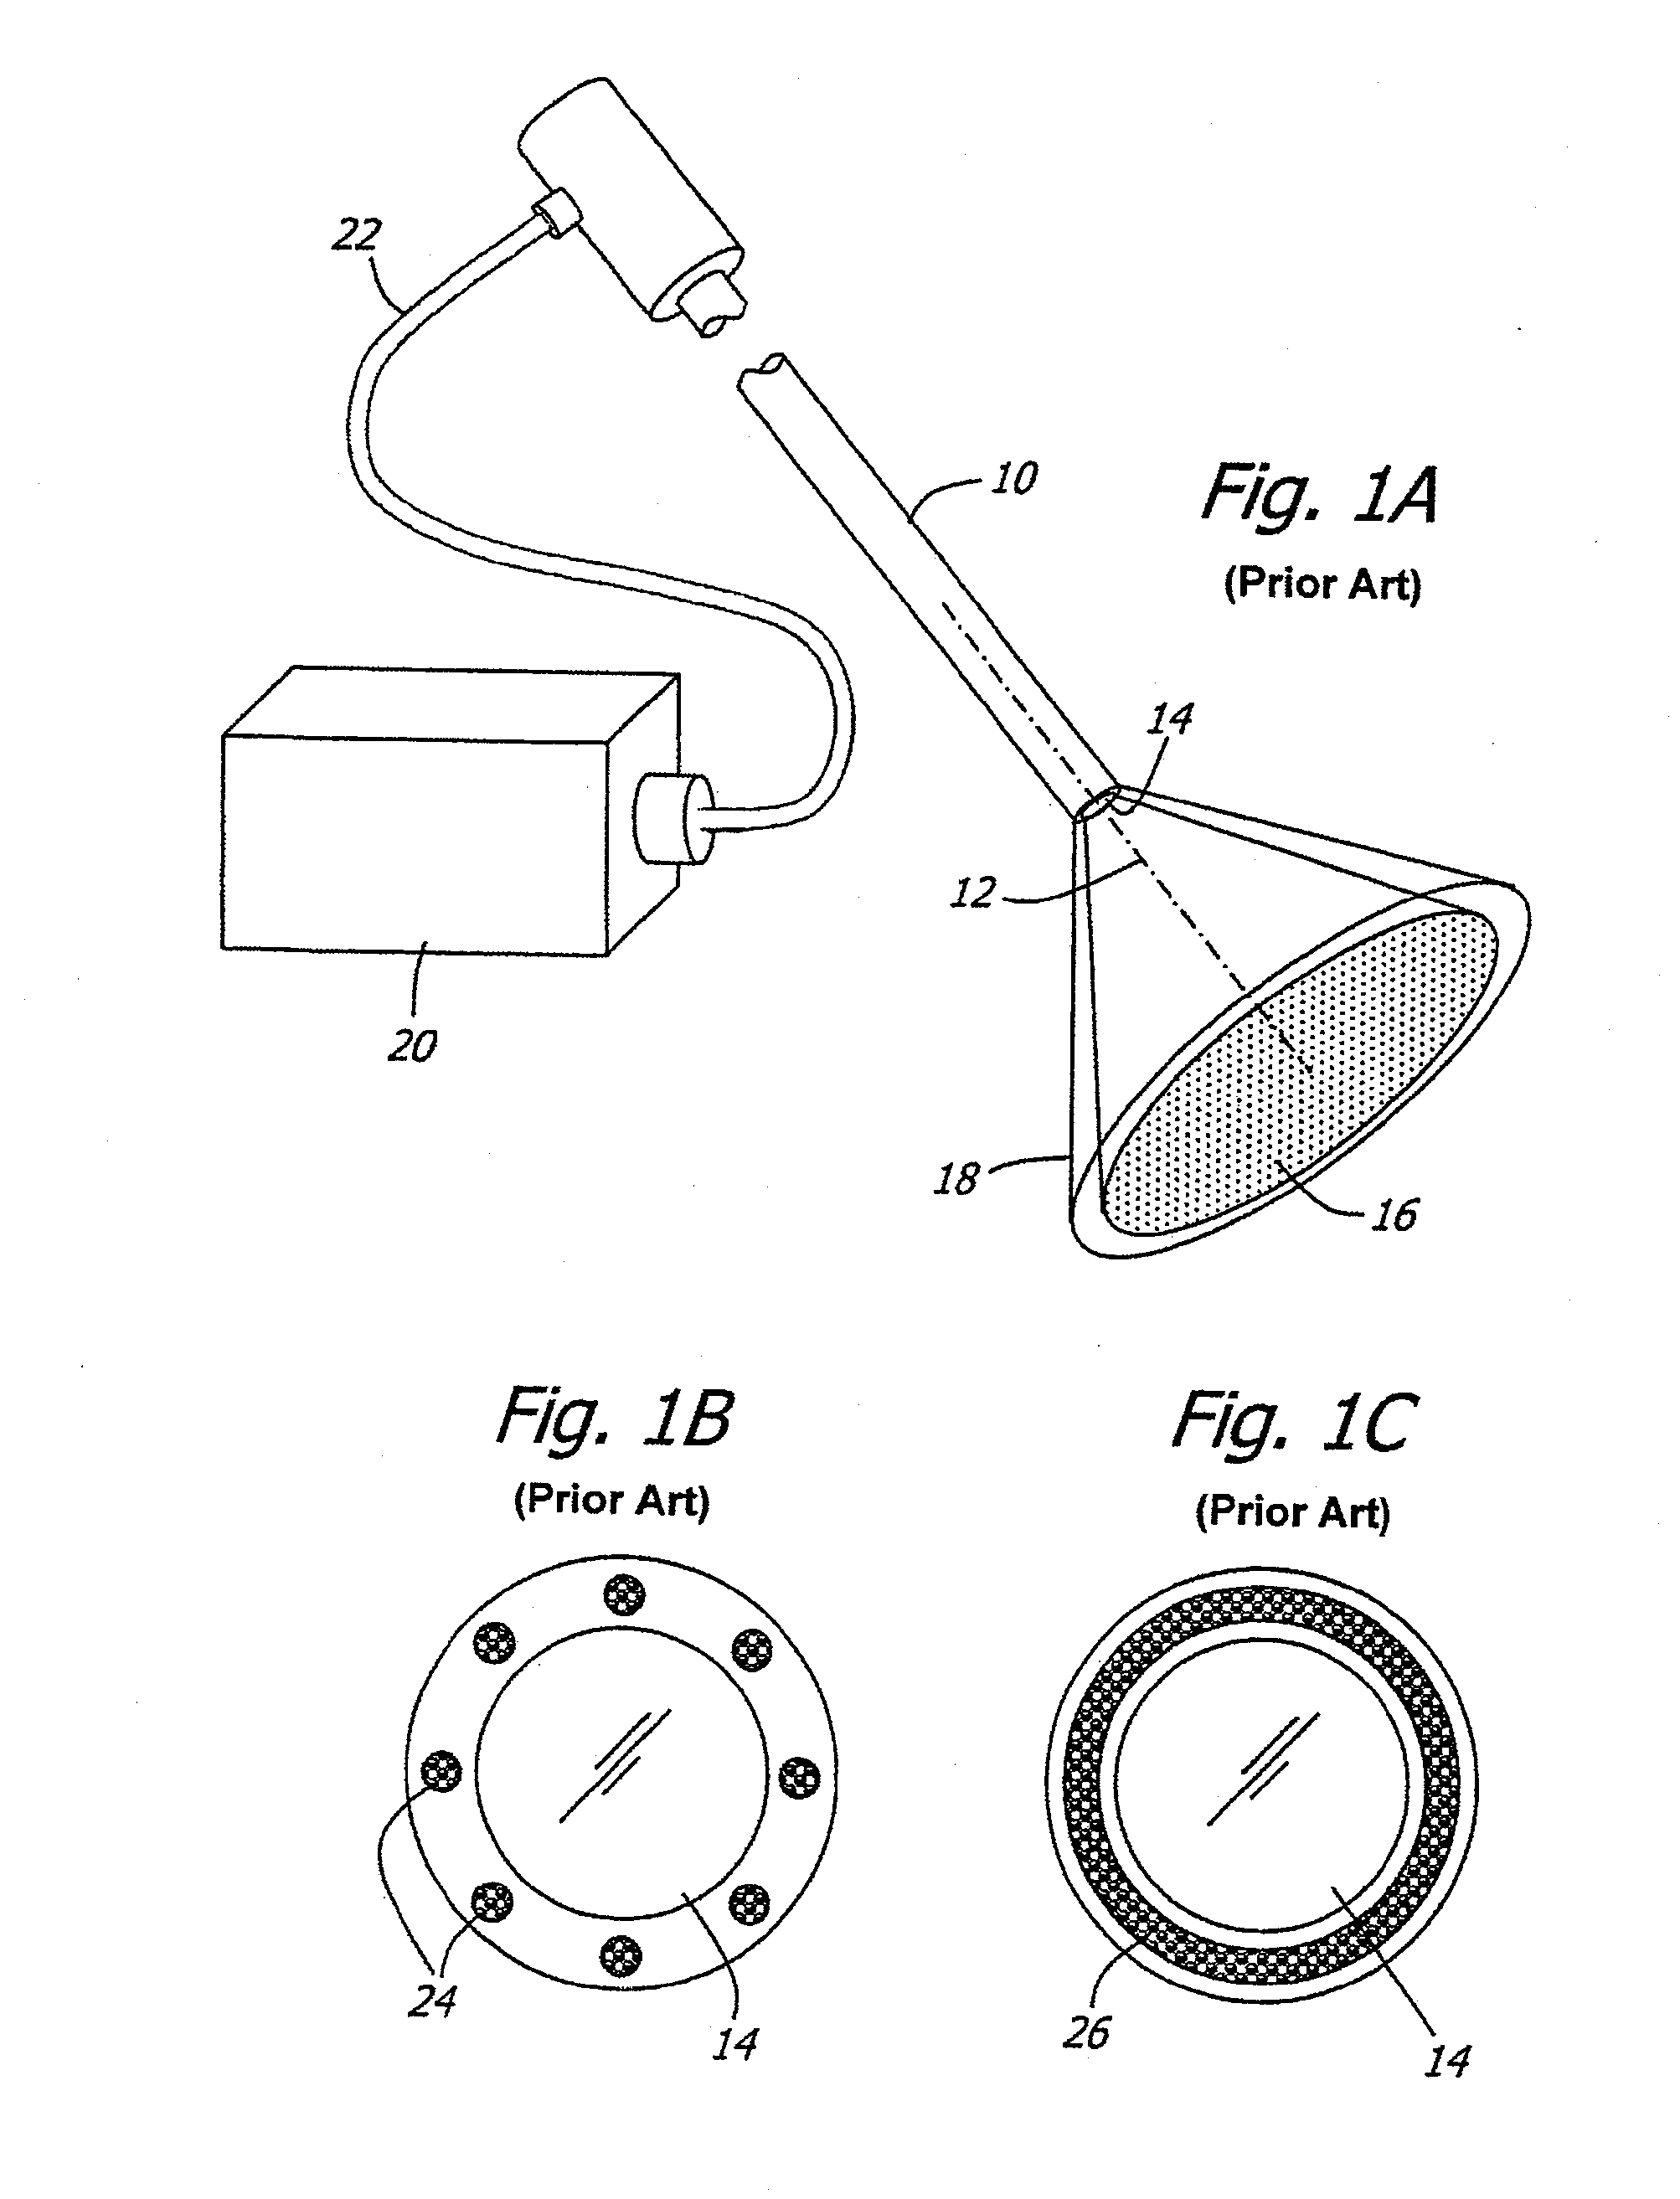 Illumination System For Variable Direction Of View Instruments